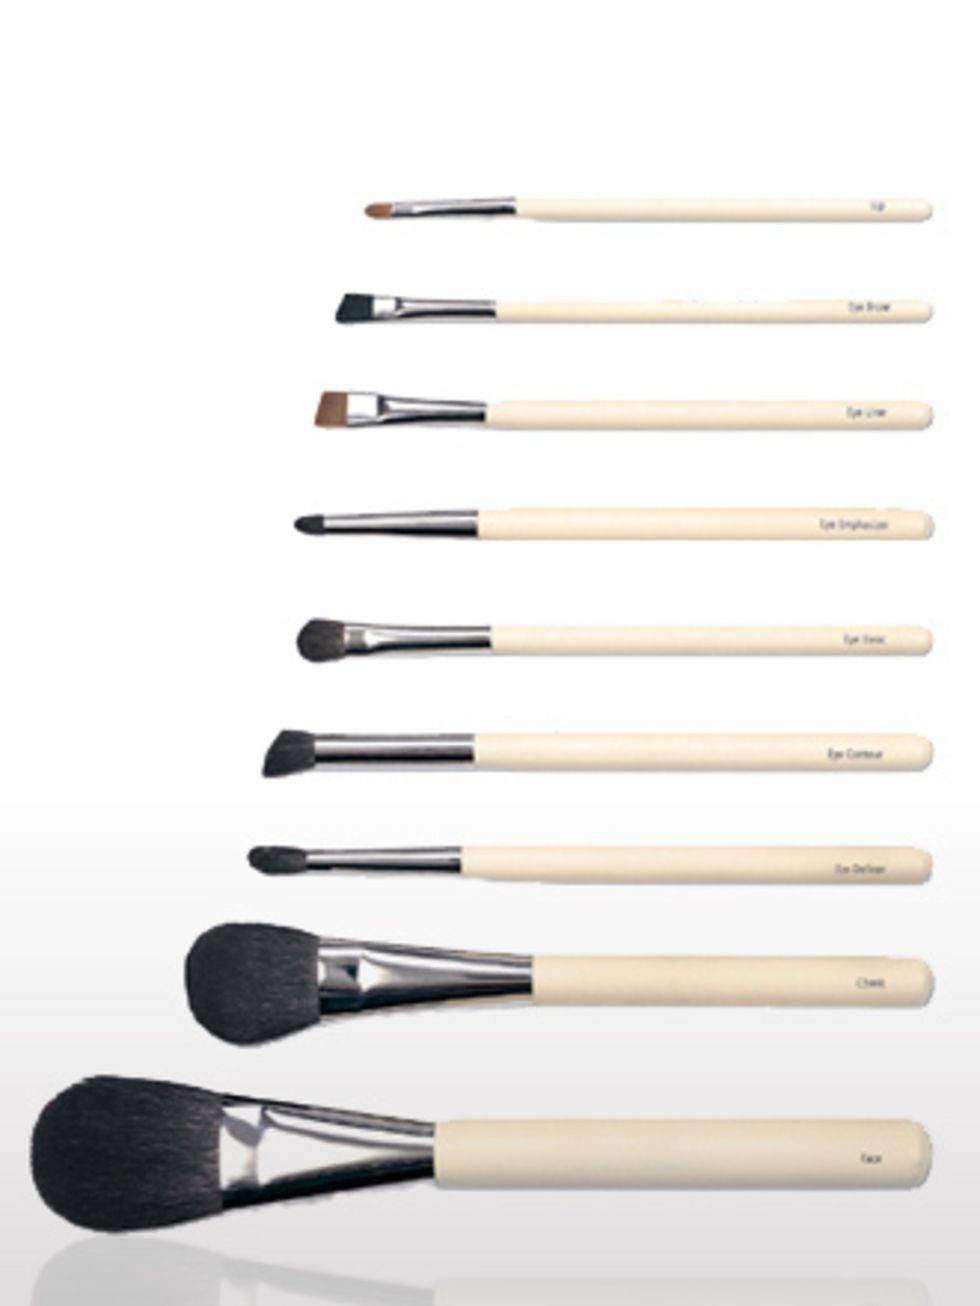 <p>Brushes, from £16.50 by Chantecaille at <a href="http://www.spacenk.co.uk/category/shop+by+brand/chantecaille/makeup/brushes.do?sortby=newArrivals&amp;page=all">Space NK</a></p><p>Natural bristle brushes are expensive but well worth the investment as t